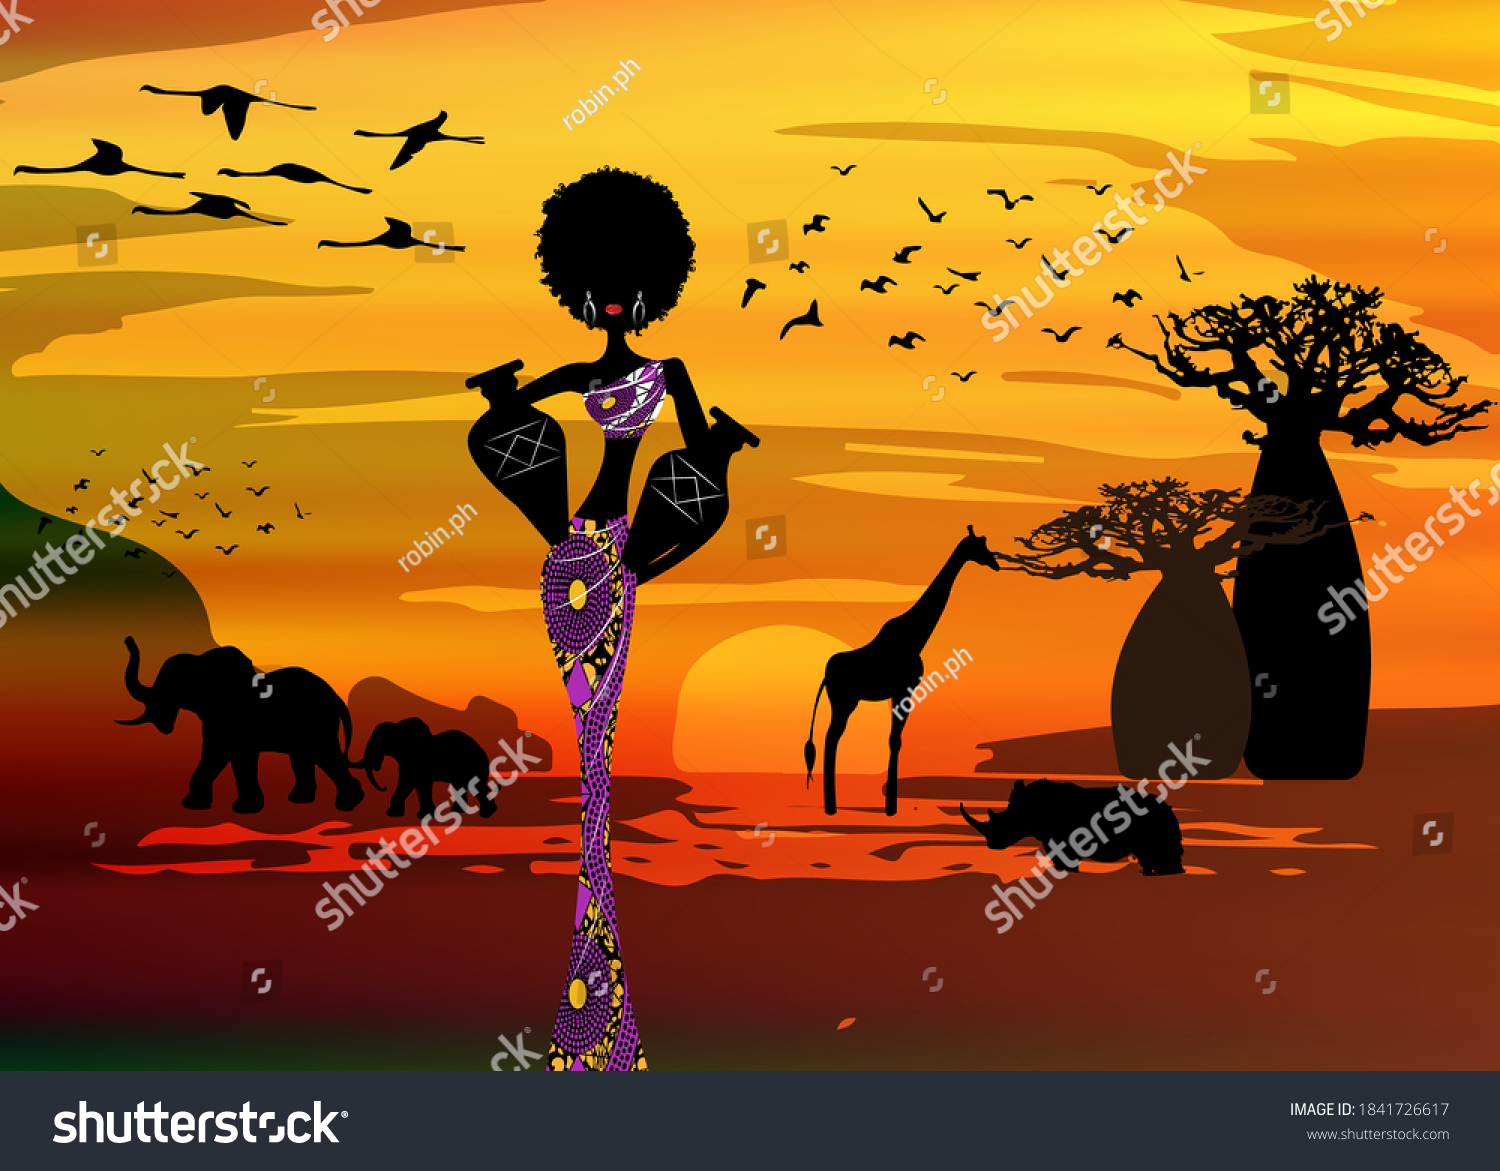 SVG of sunset landscape of forest baobab trees, elephants in the savannah and African curly woman carrying water in the pots, dressed in traditional ankara dress. Batik concept savannah safari background  svg